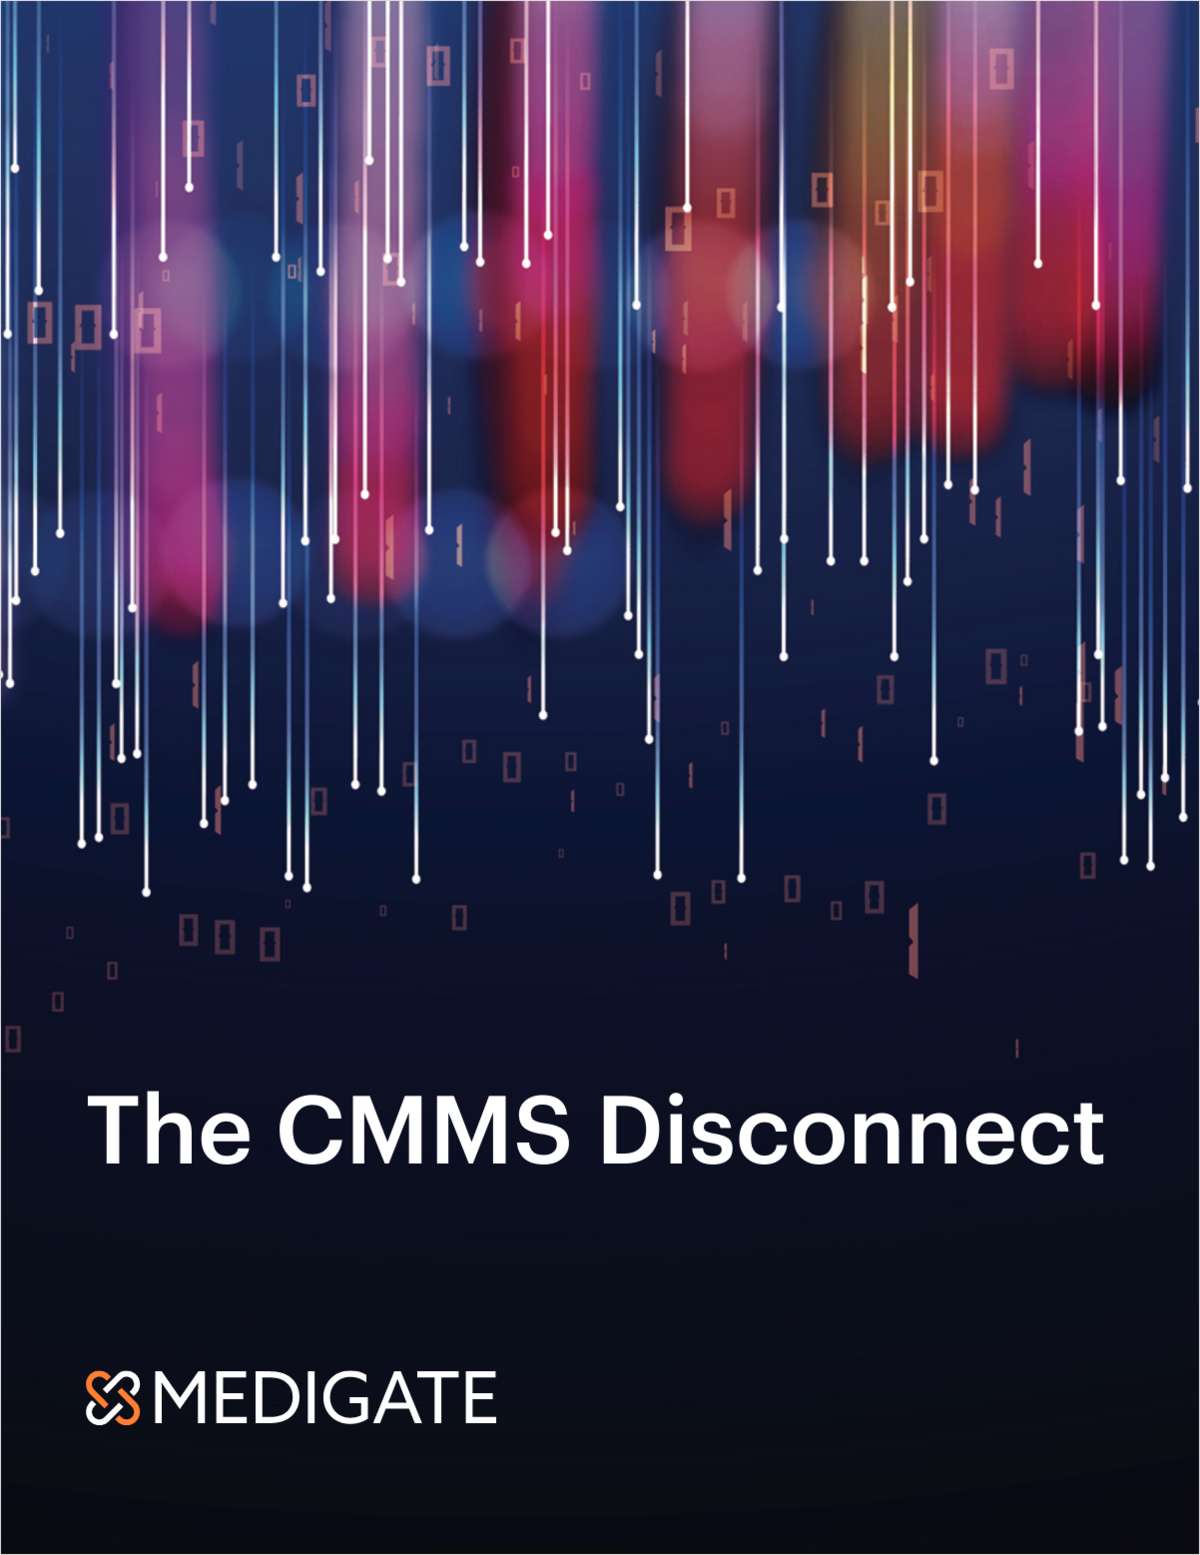 The CMMS Disconnect